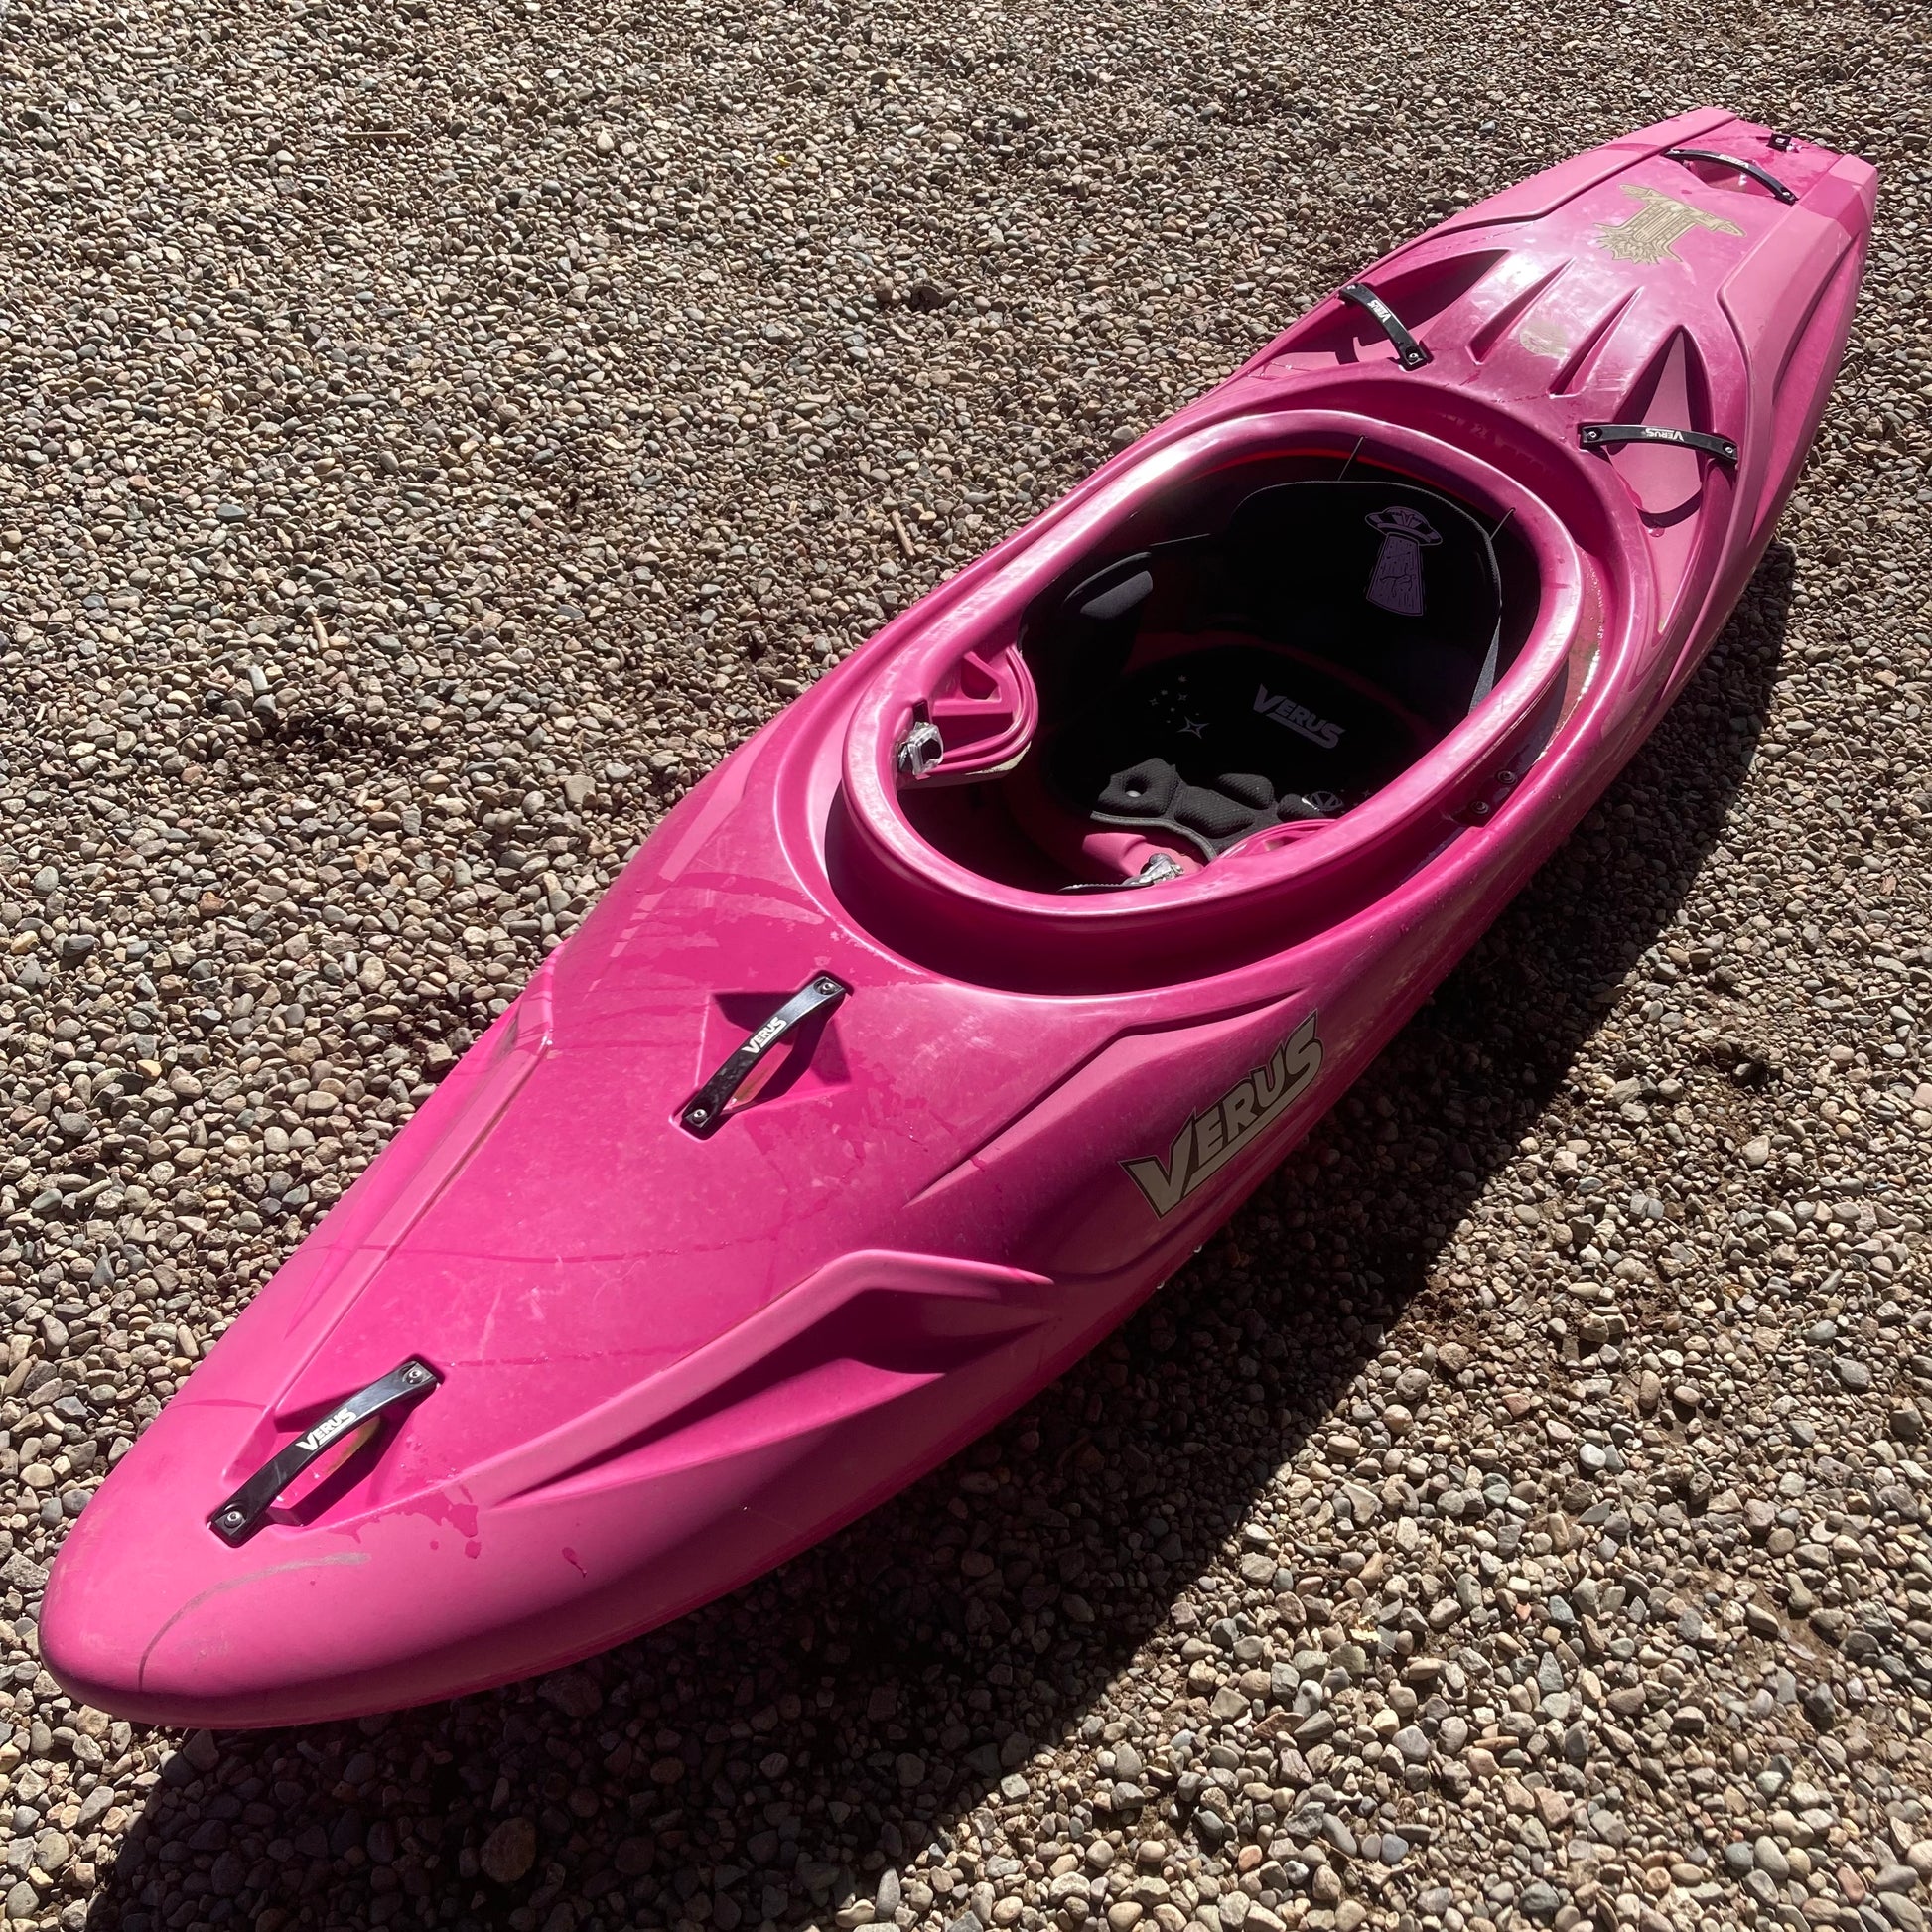 A Verus Demo Flux S/M kayak laying on the ground.